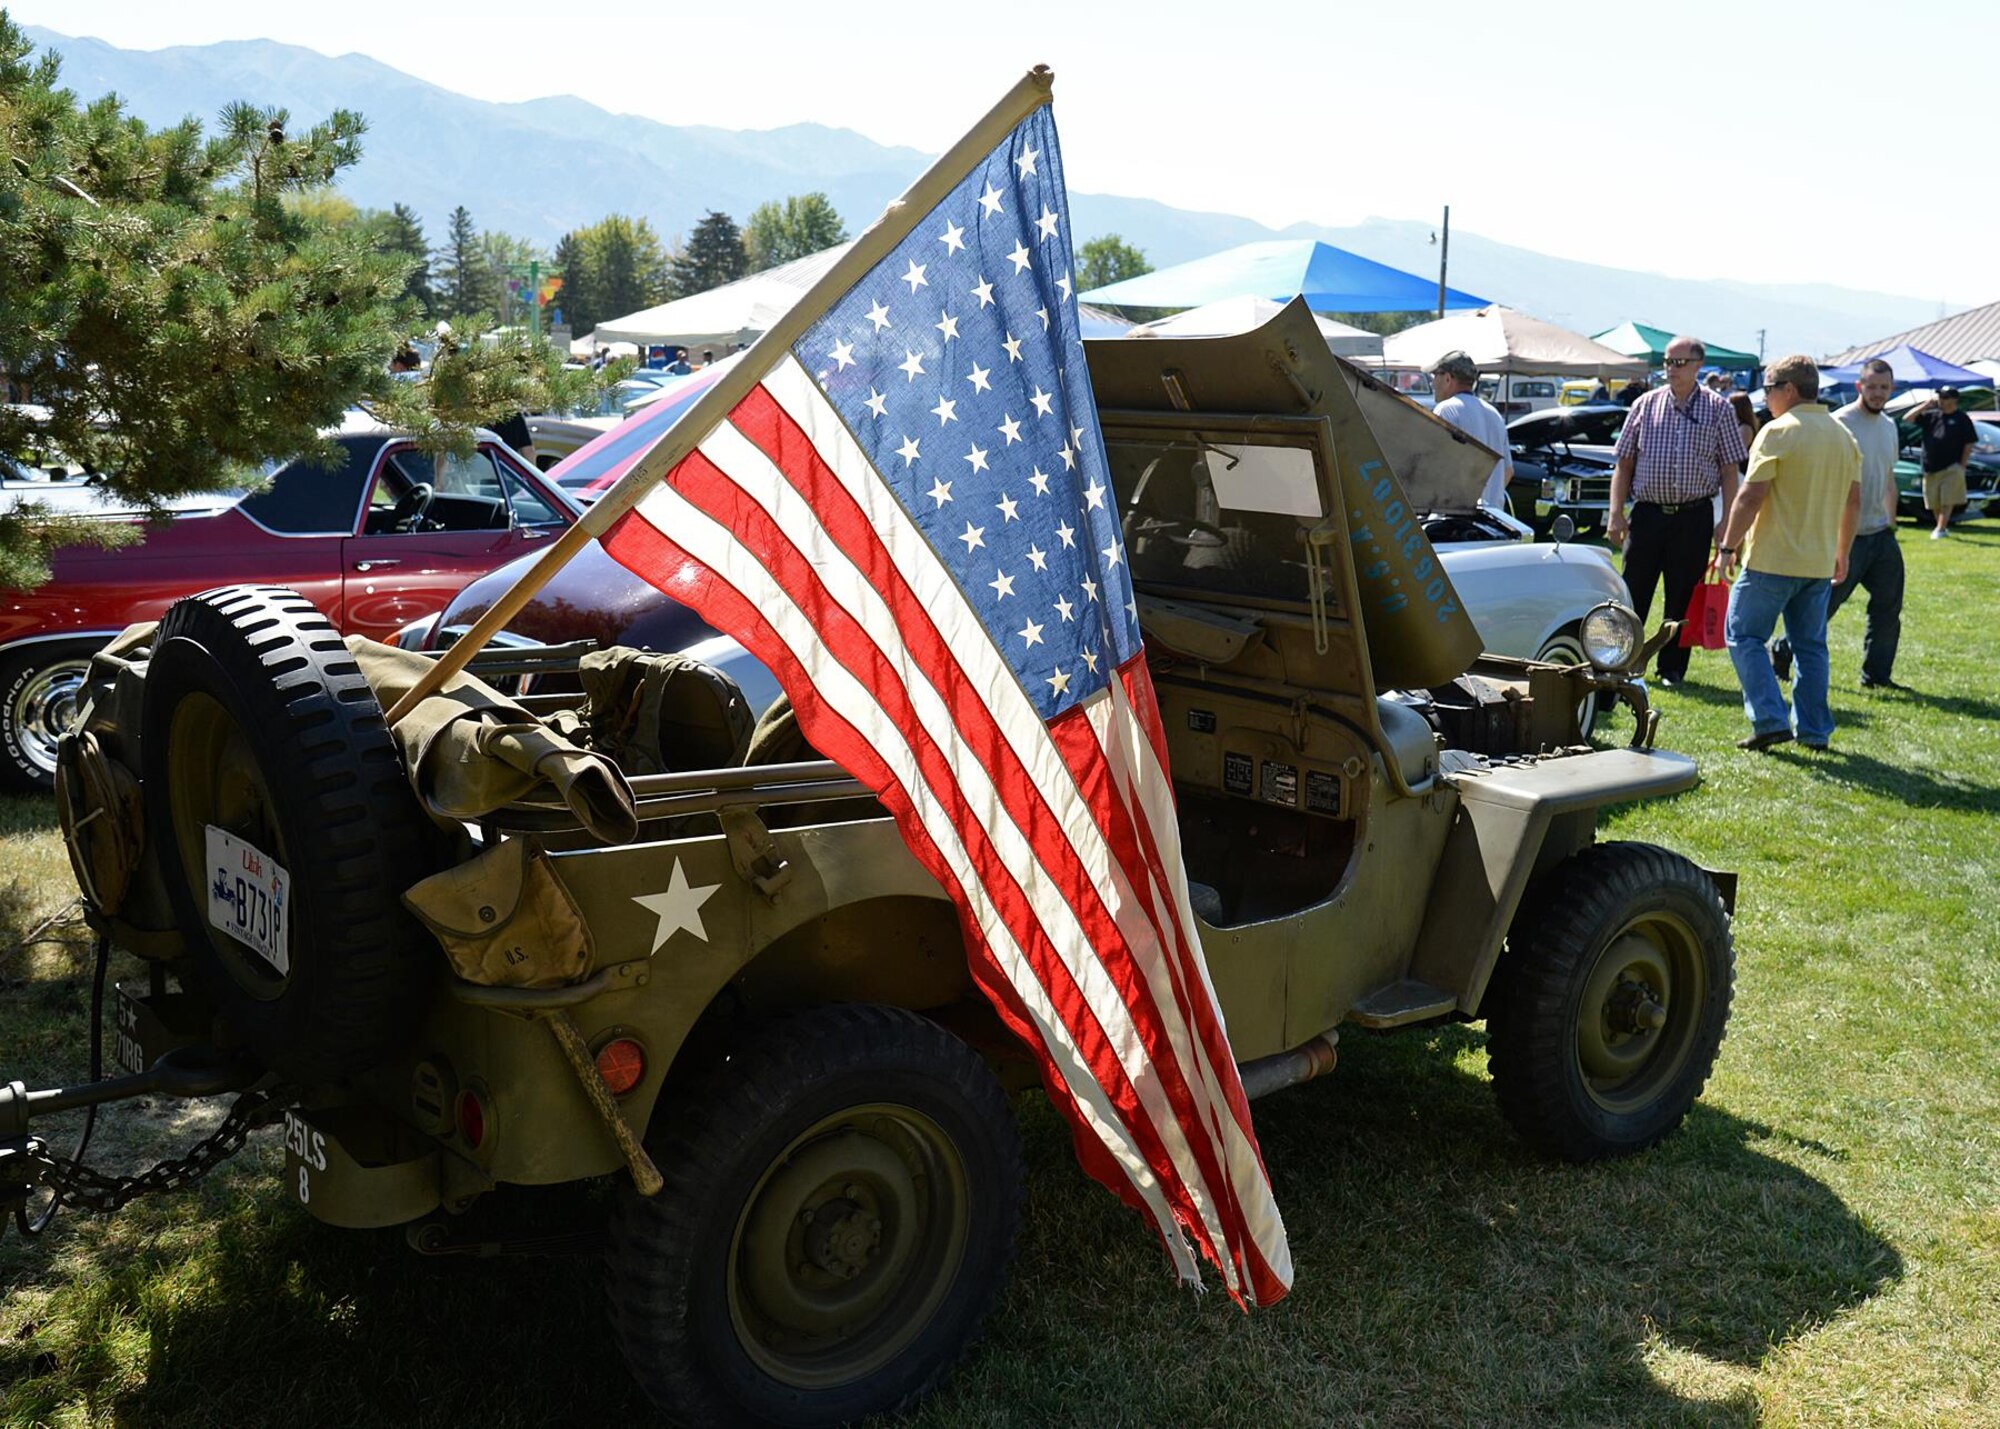 Greg Brubaker, 517th Software Maintenance Squadron, flies the flag proudly on his a 1944 Willys Jeep. The jeep has been used as a prop in several movies. It also won Best Unique Vehicle during the show. (U.S. Air Force photo by Alex R. Lloyd)